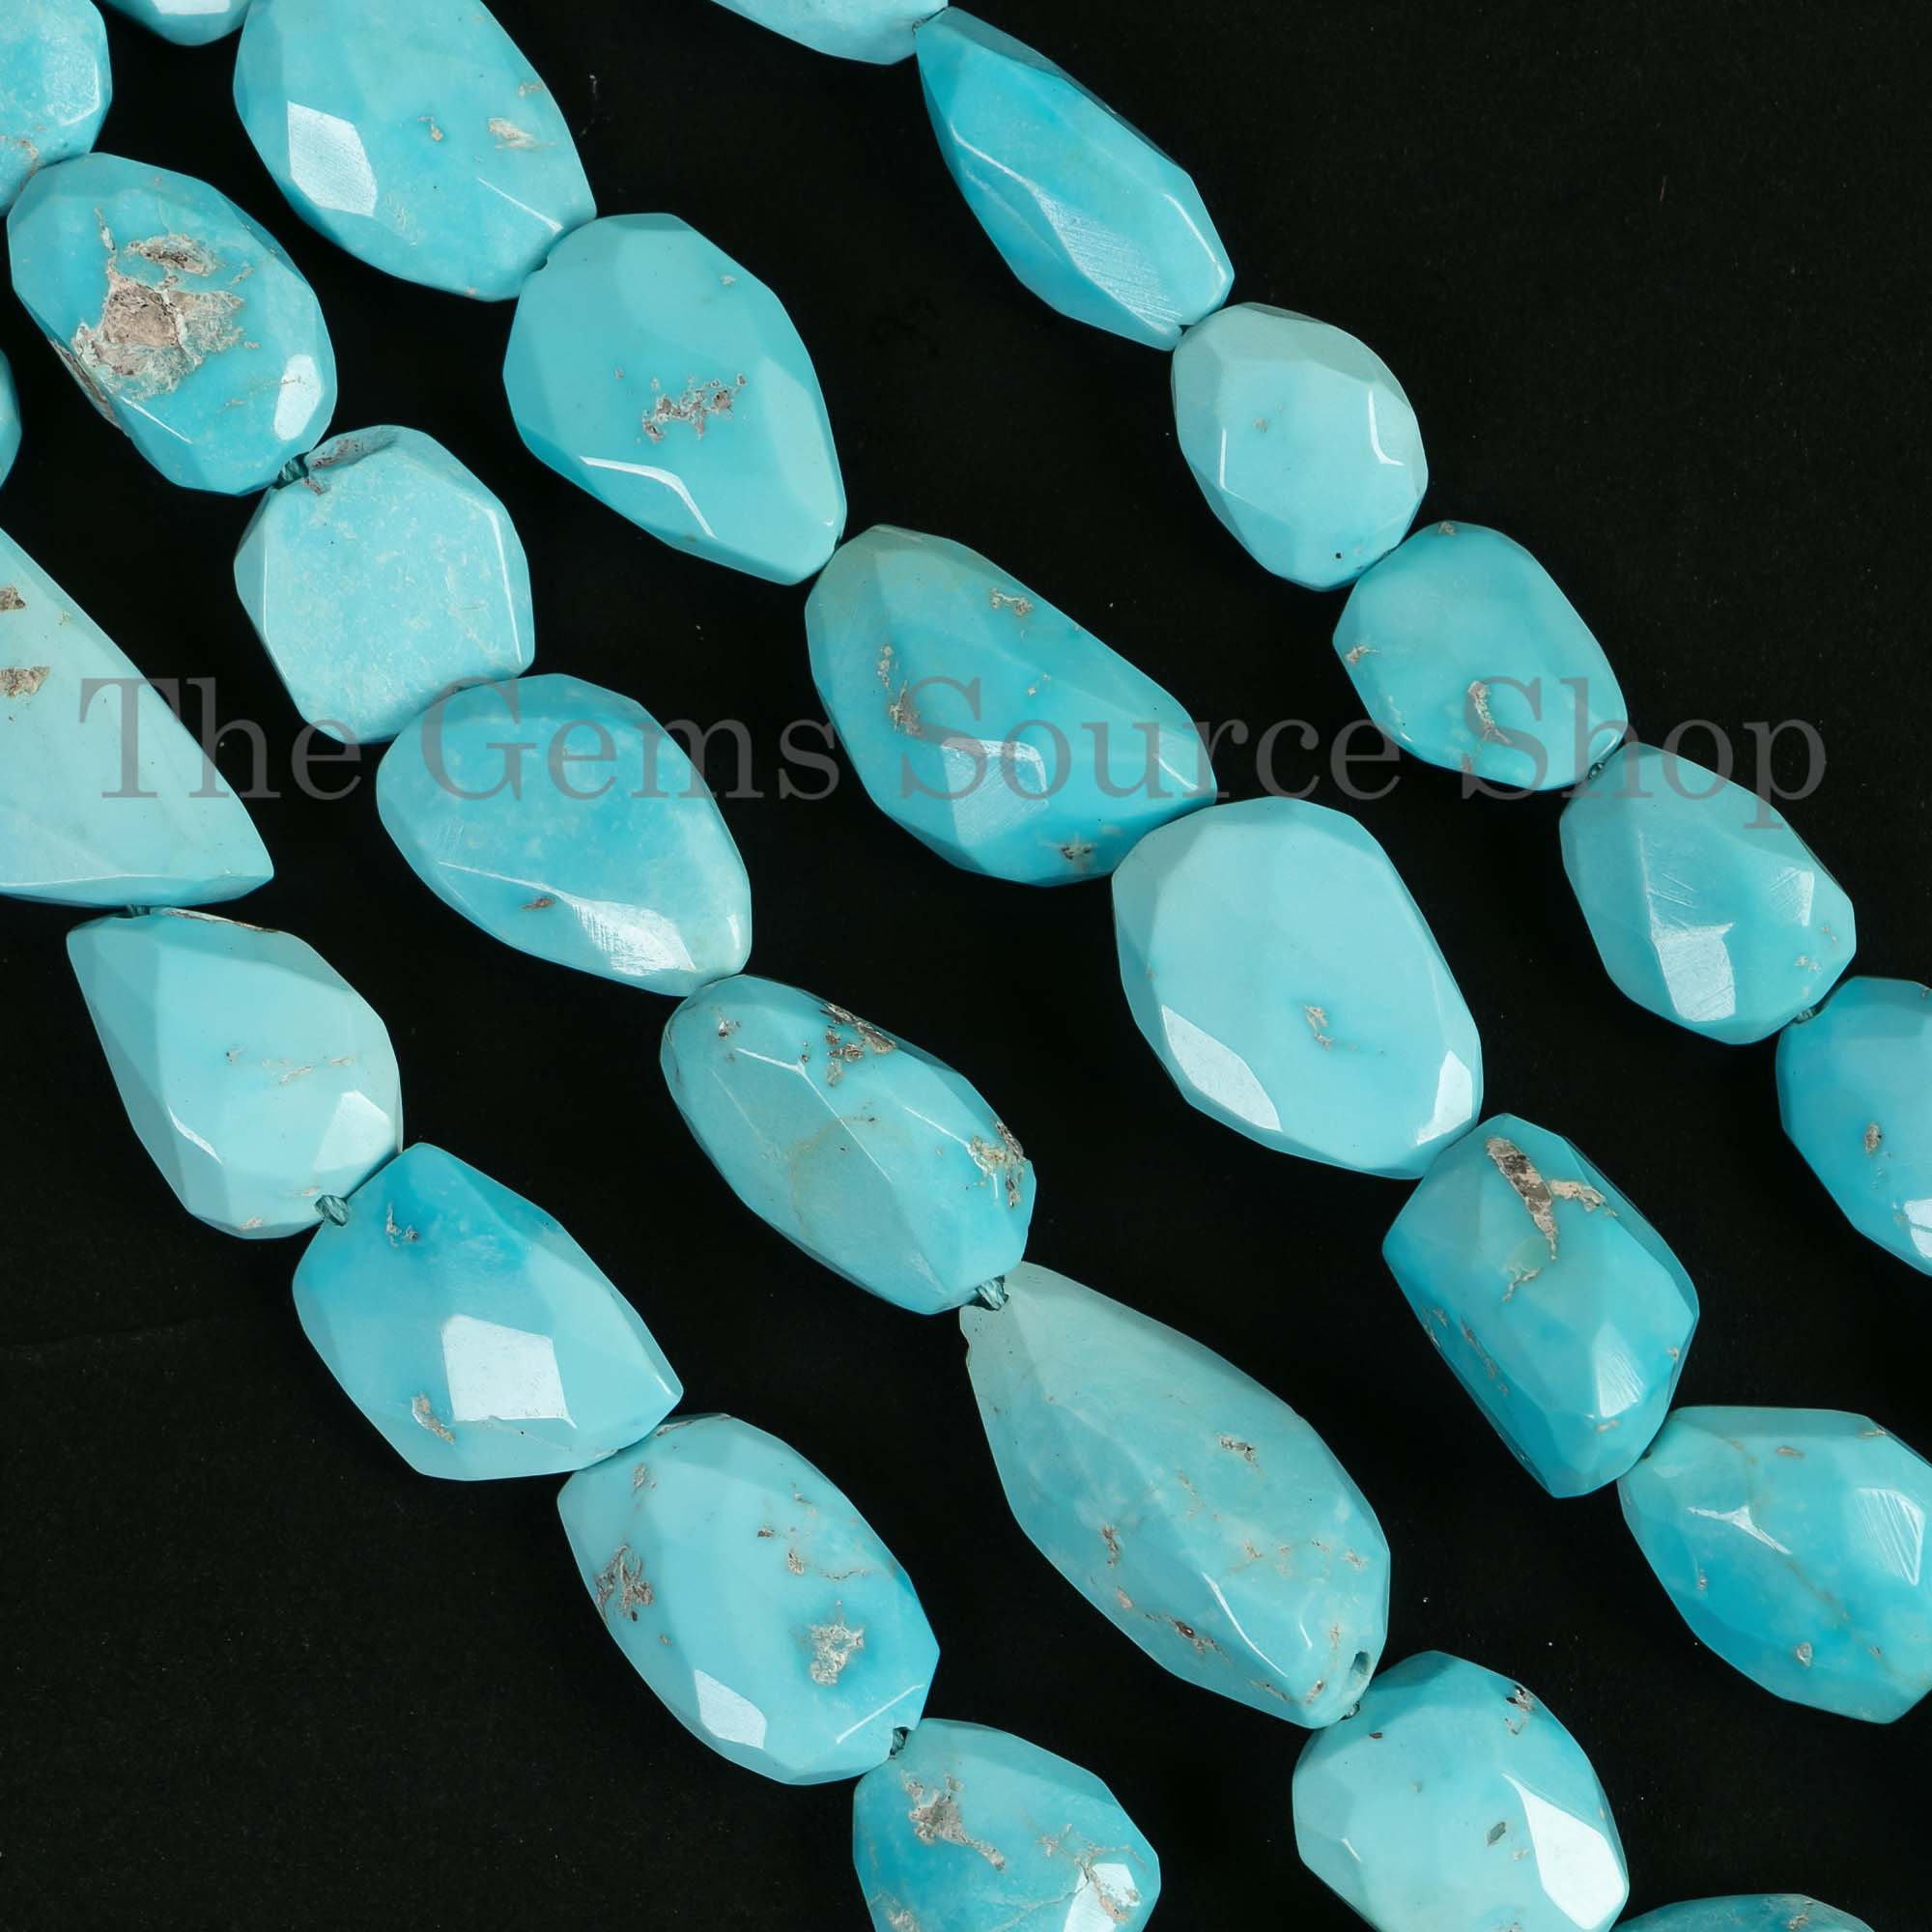 Sleeping Beauty Turquoise Nuggets, Natural Turquoise Faceted Tumbles, Briolette Nuggets, Loose Turquoise Beads